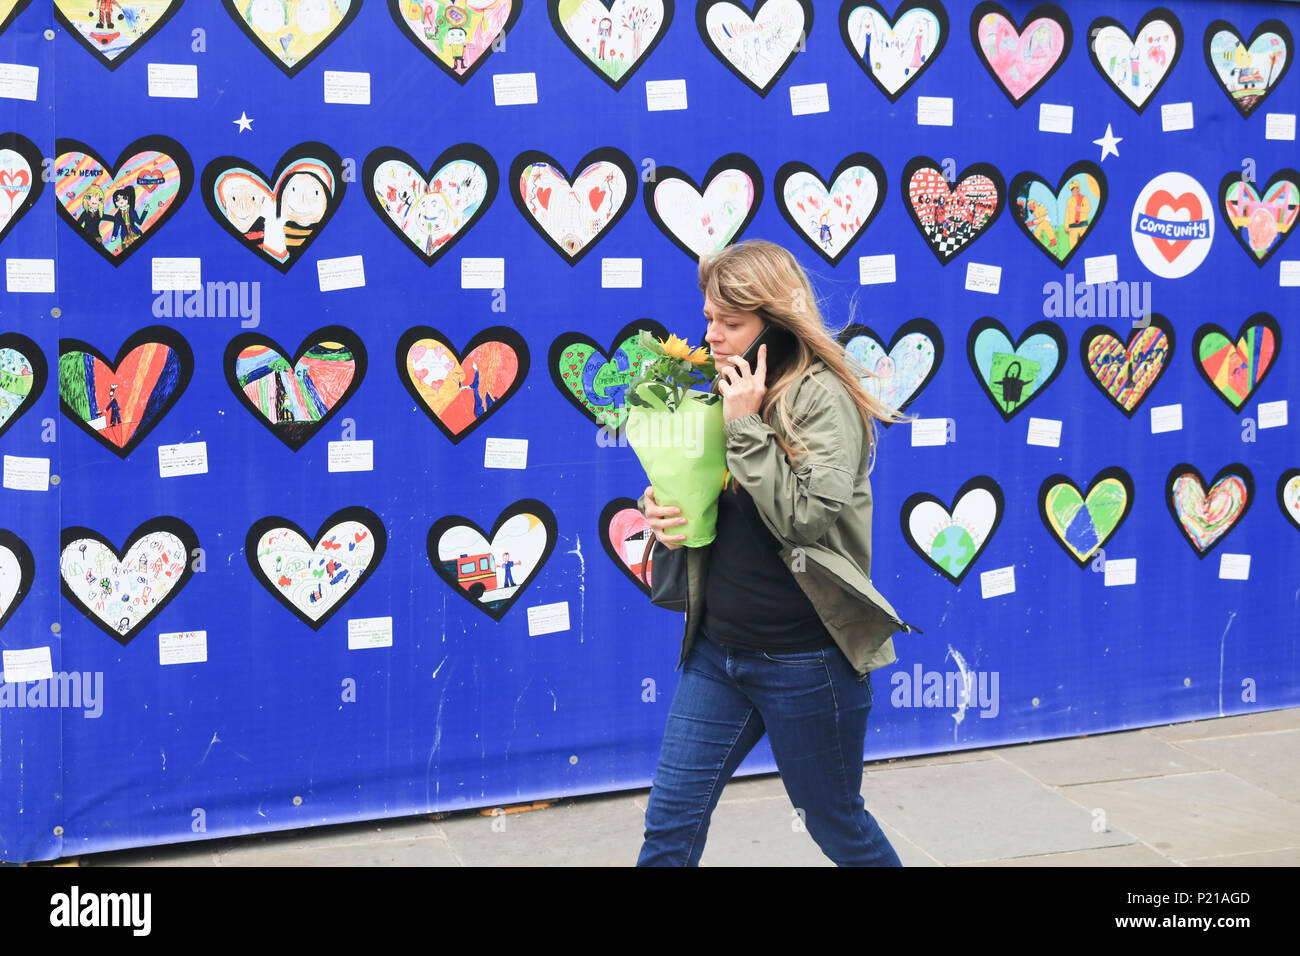 London UK. 14th June 2018. Grenfell anniversary a year after the fire  in West London which claimed the lives of 72 residents in the tower block.  A minute's silence will be observed nationally at midday to rembers the victims of the Grenfell fire on 14 June 2018. Credit: amer ghazzal/Alamy Live News Stock Photo